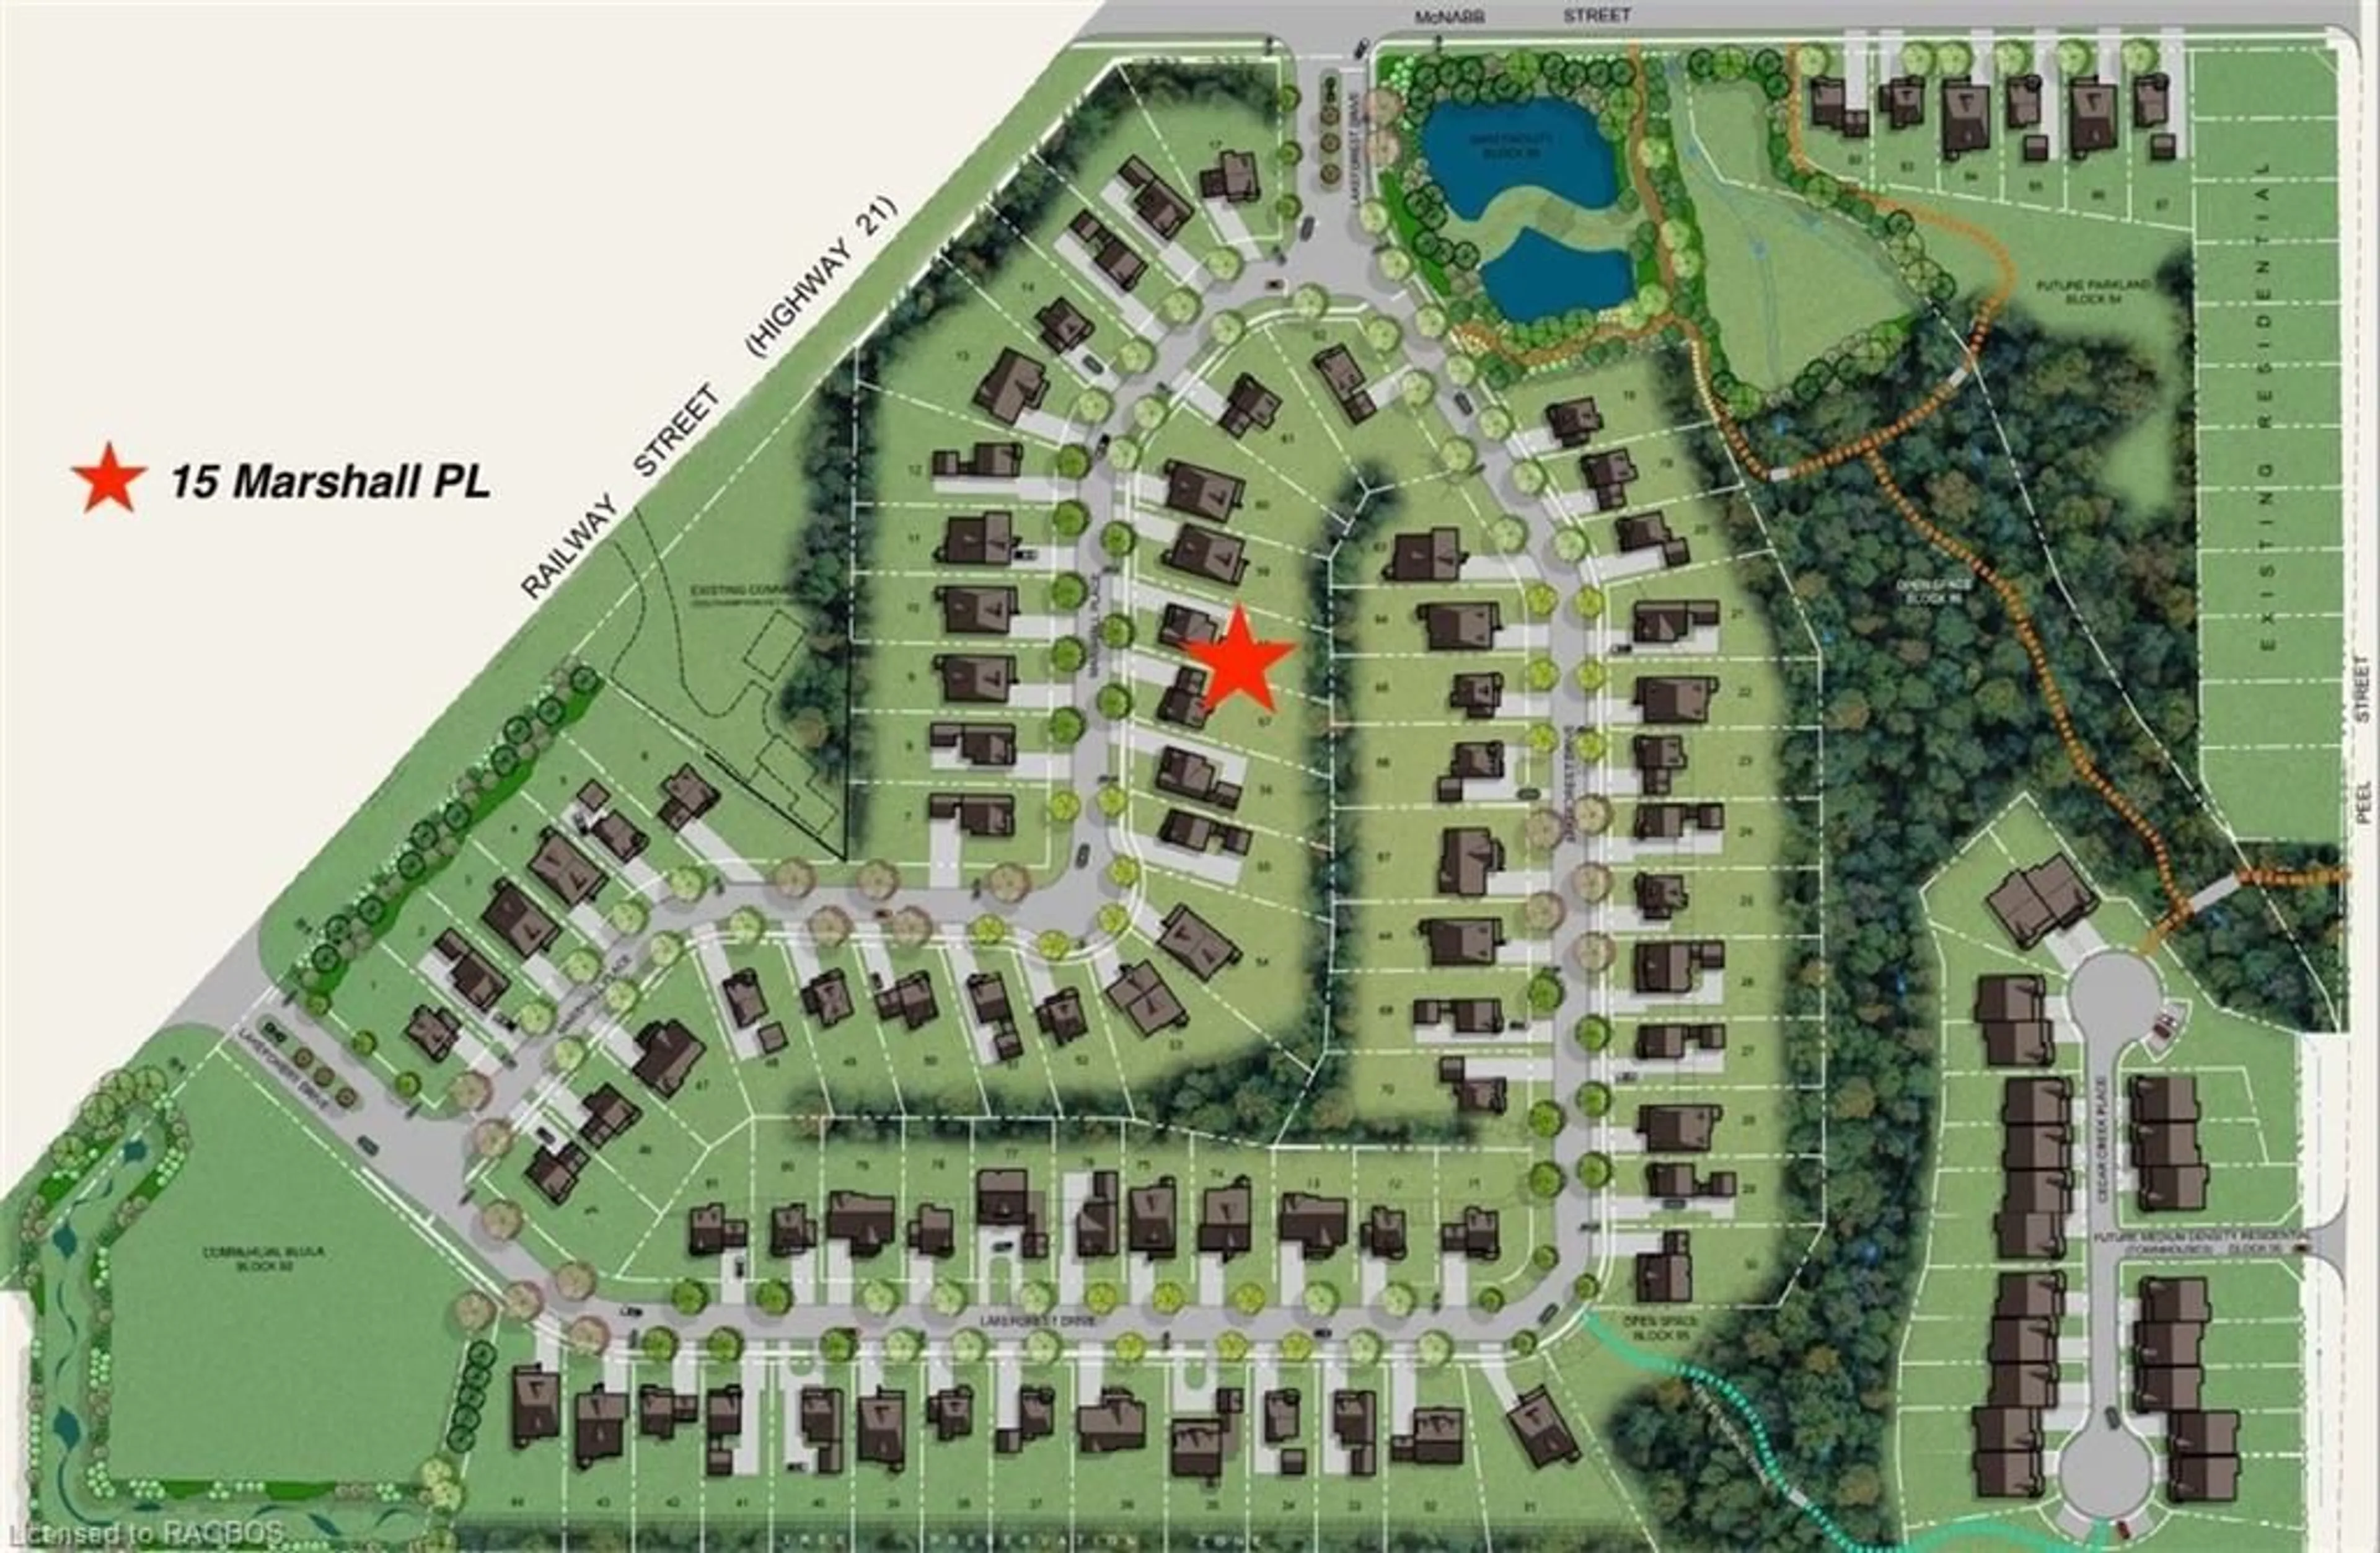 Picture of a map for 15 Marshall Pl, Southampton Ontario N0H 2L0